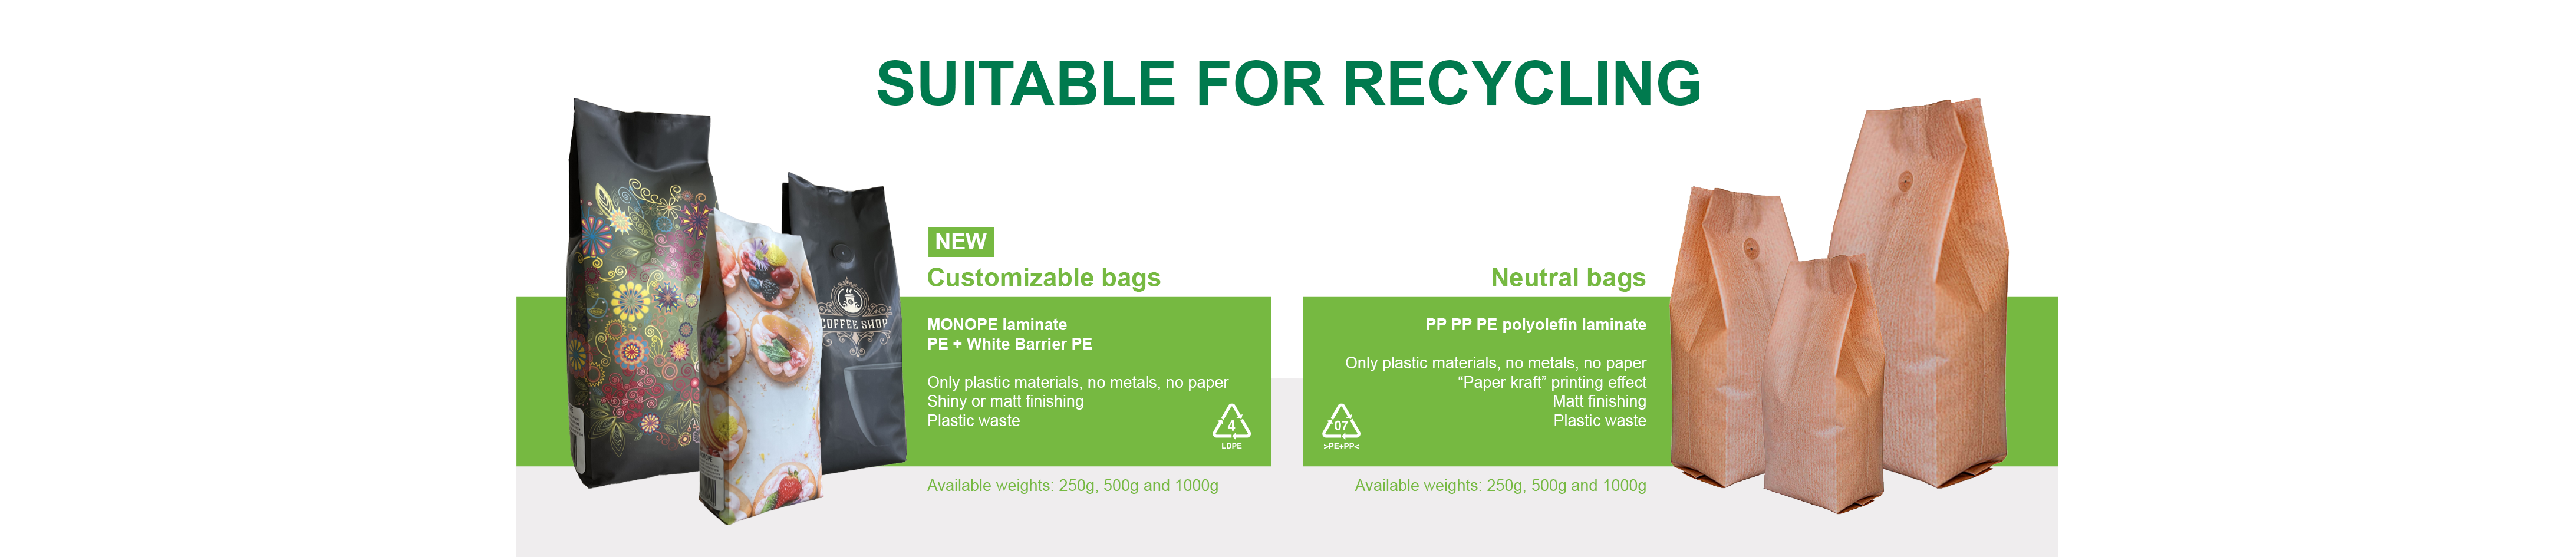 banner_recyclable_bags_new.png